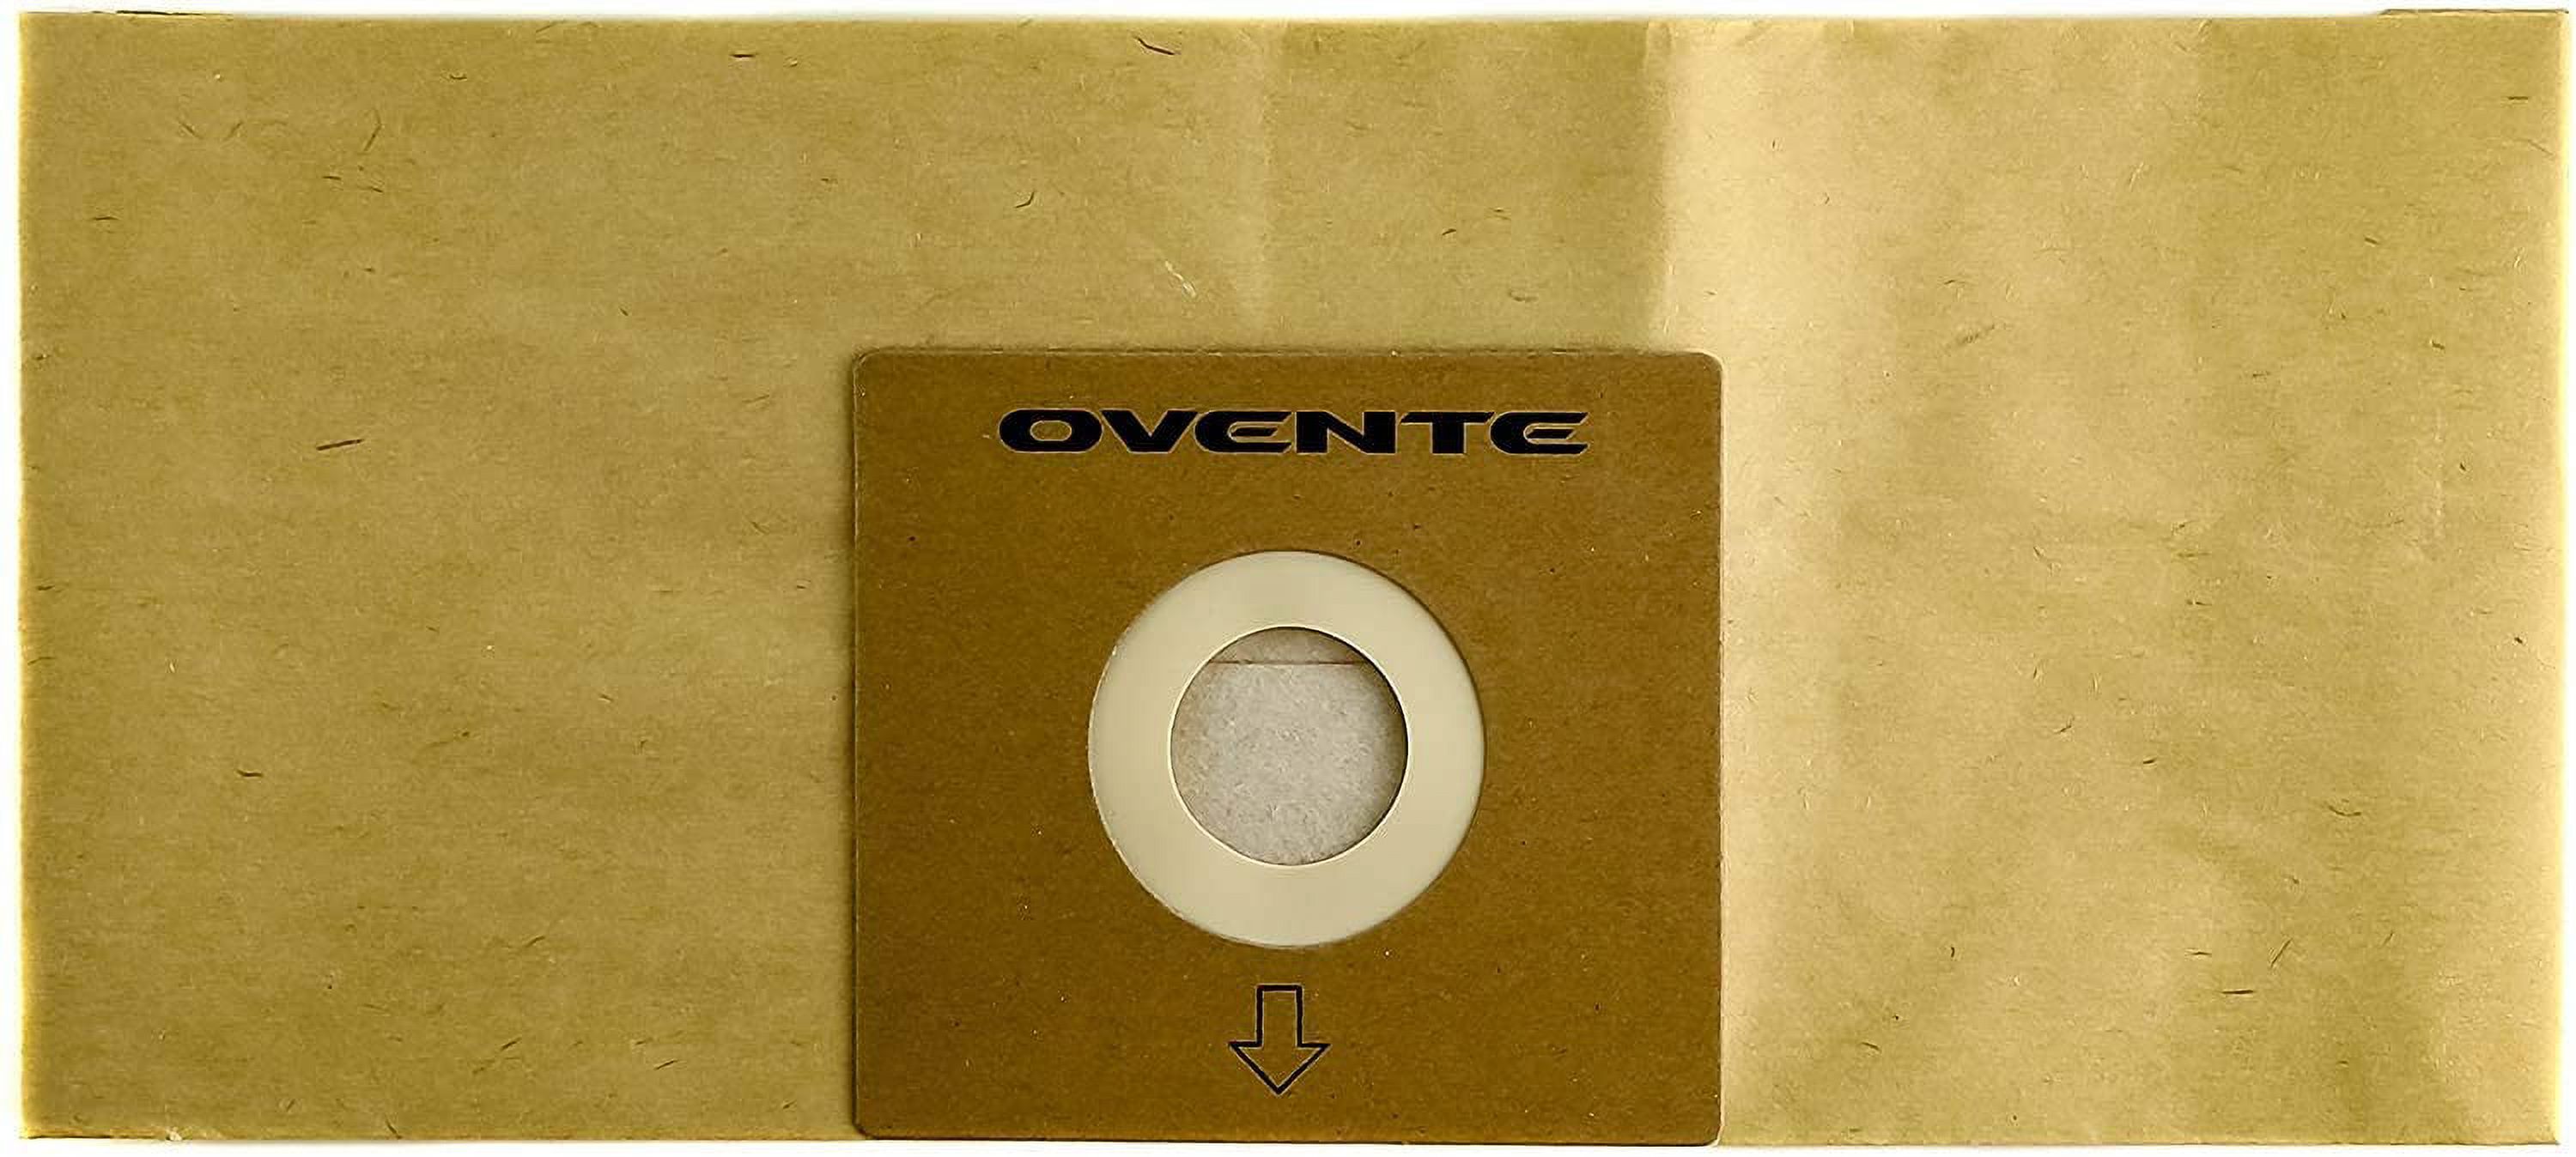 Ovente 4-Pack Premium Disposable Compact Dust Bag Replacement with Ultra Filtration, Fit for ST1600 Canister Vacuum Cleaner Model Series Large Size and Easy Storage, Brown ACPST16704 - image 5 of 7